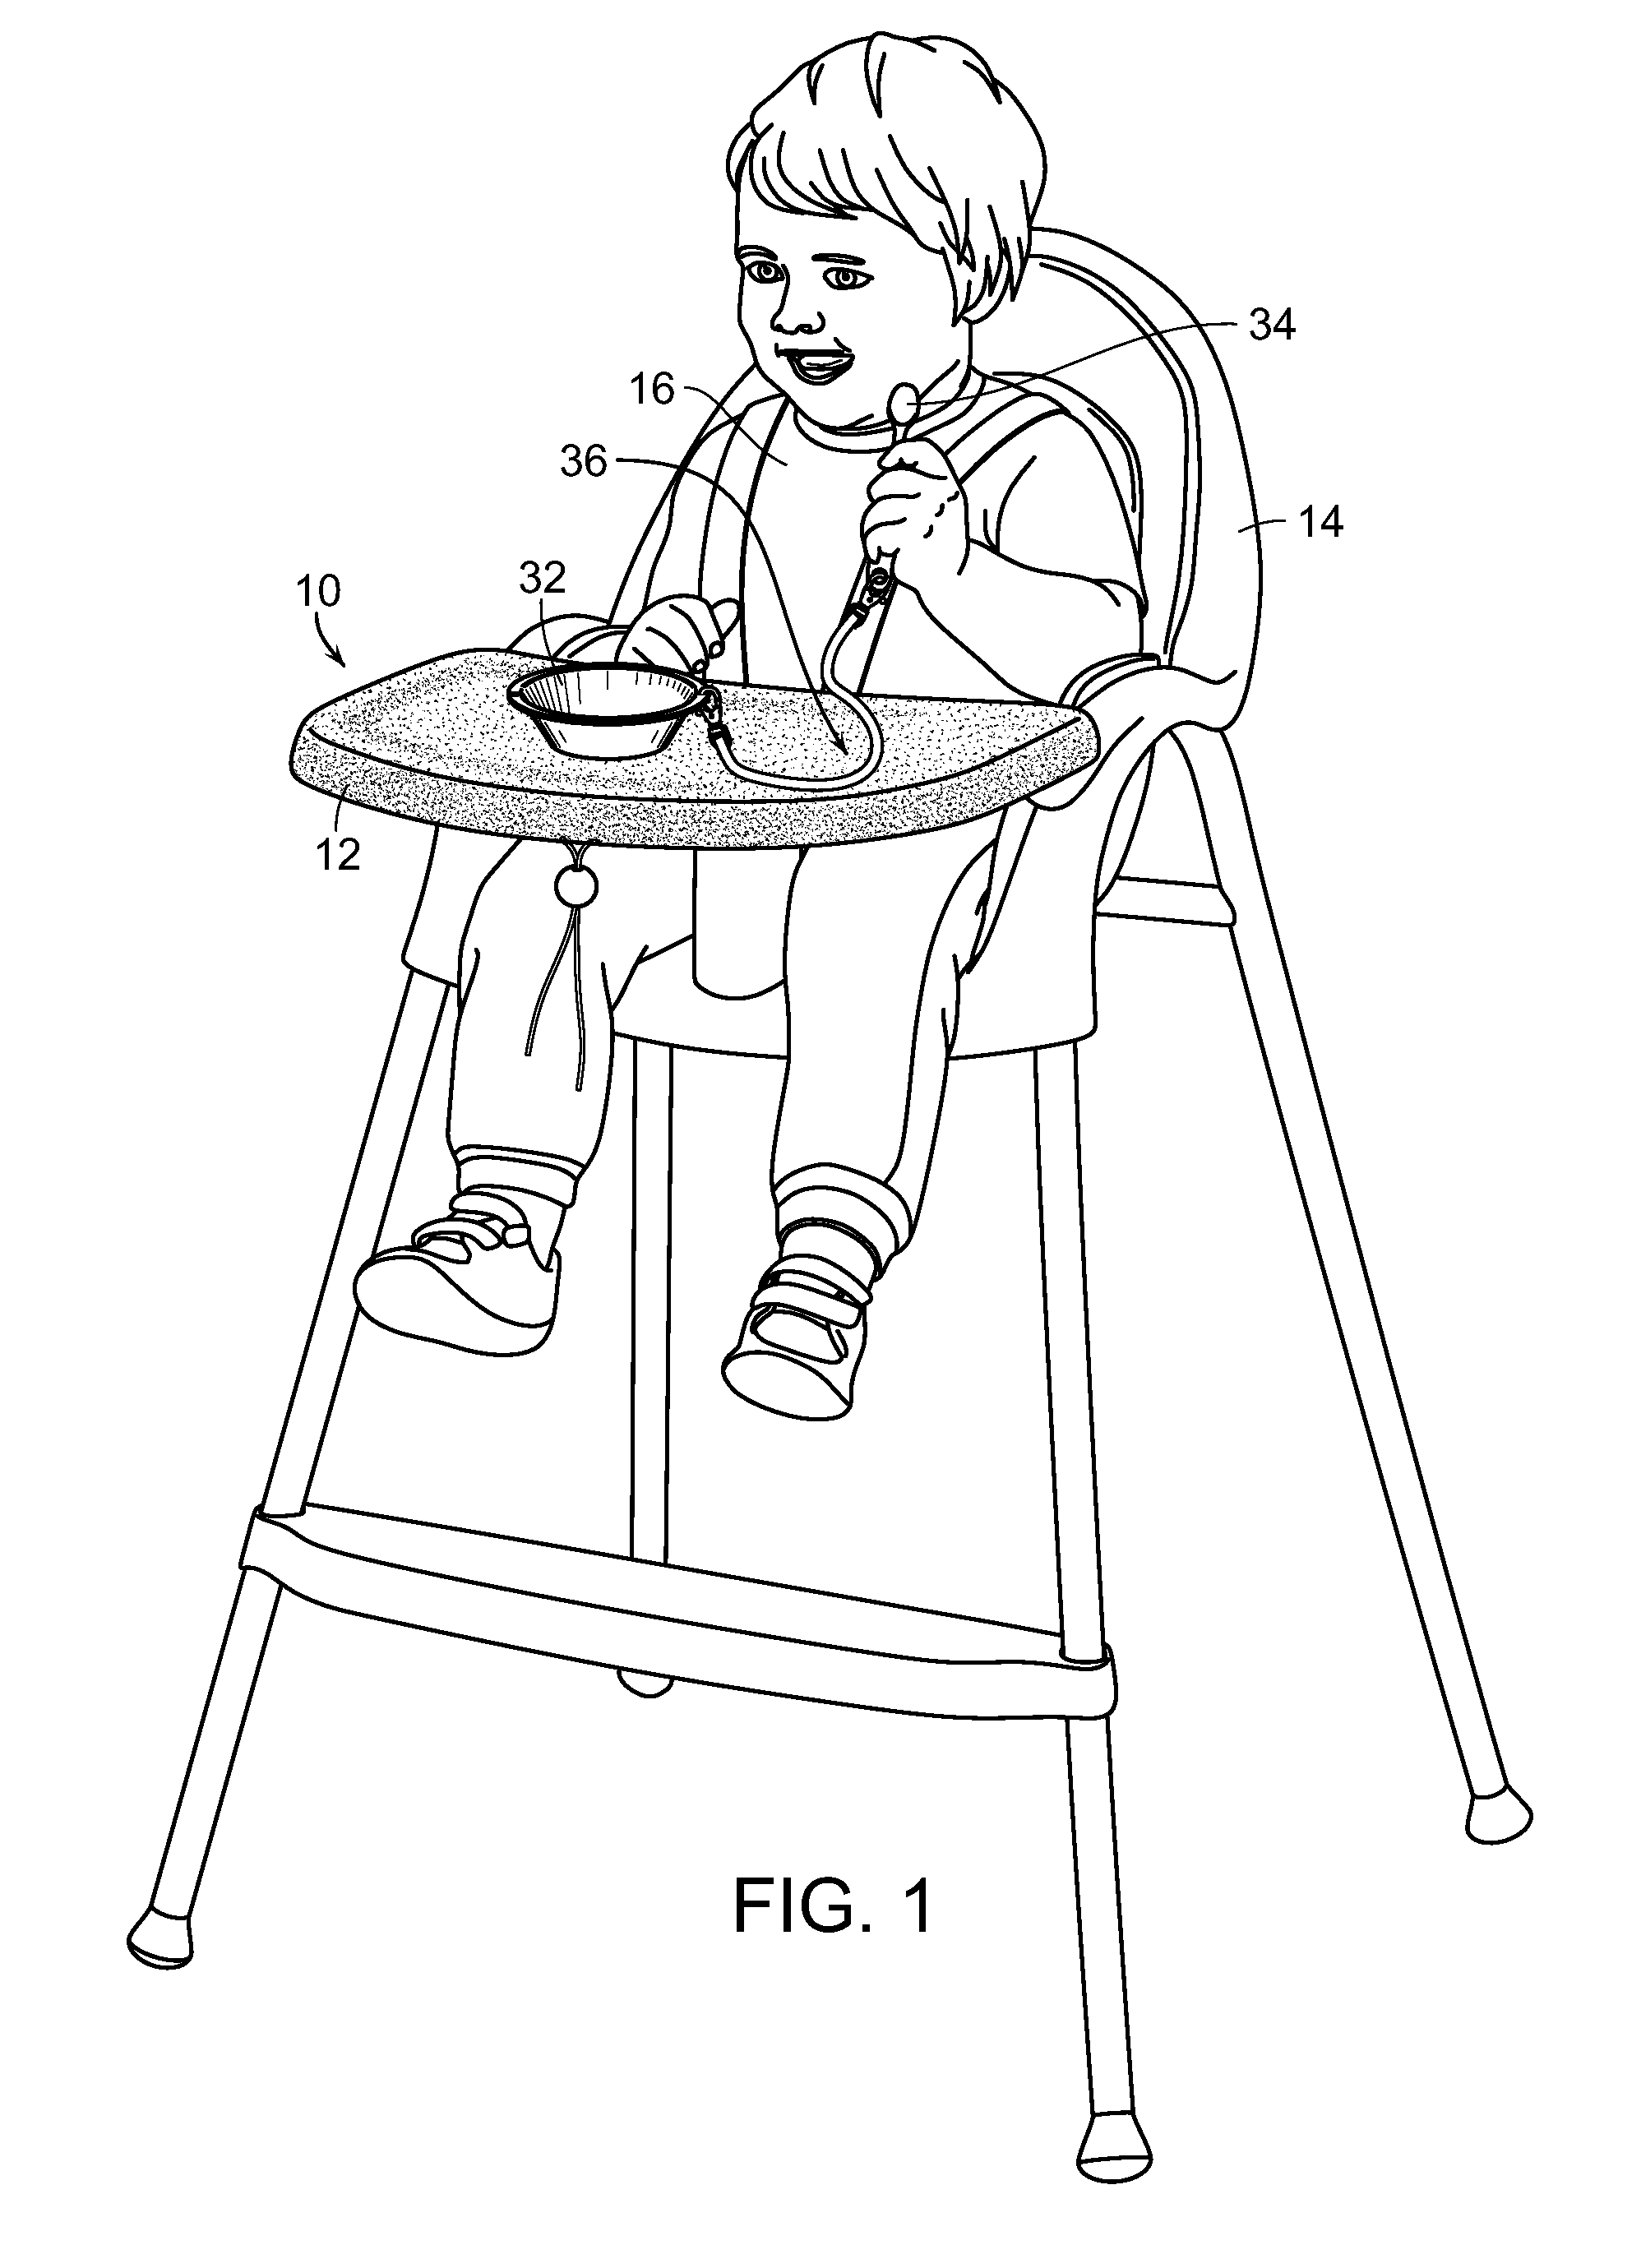 Highchair tray cover system with magnetically attachable objects